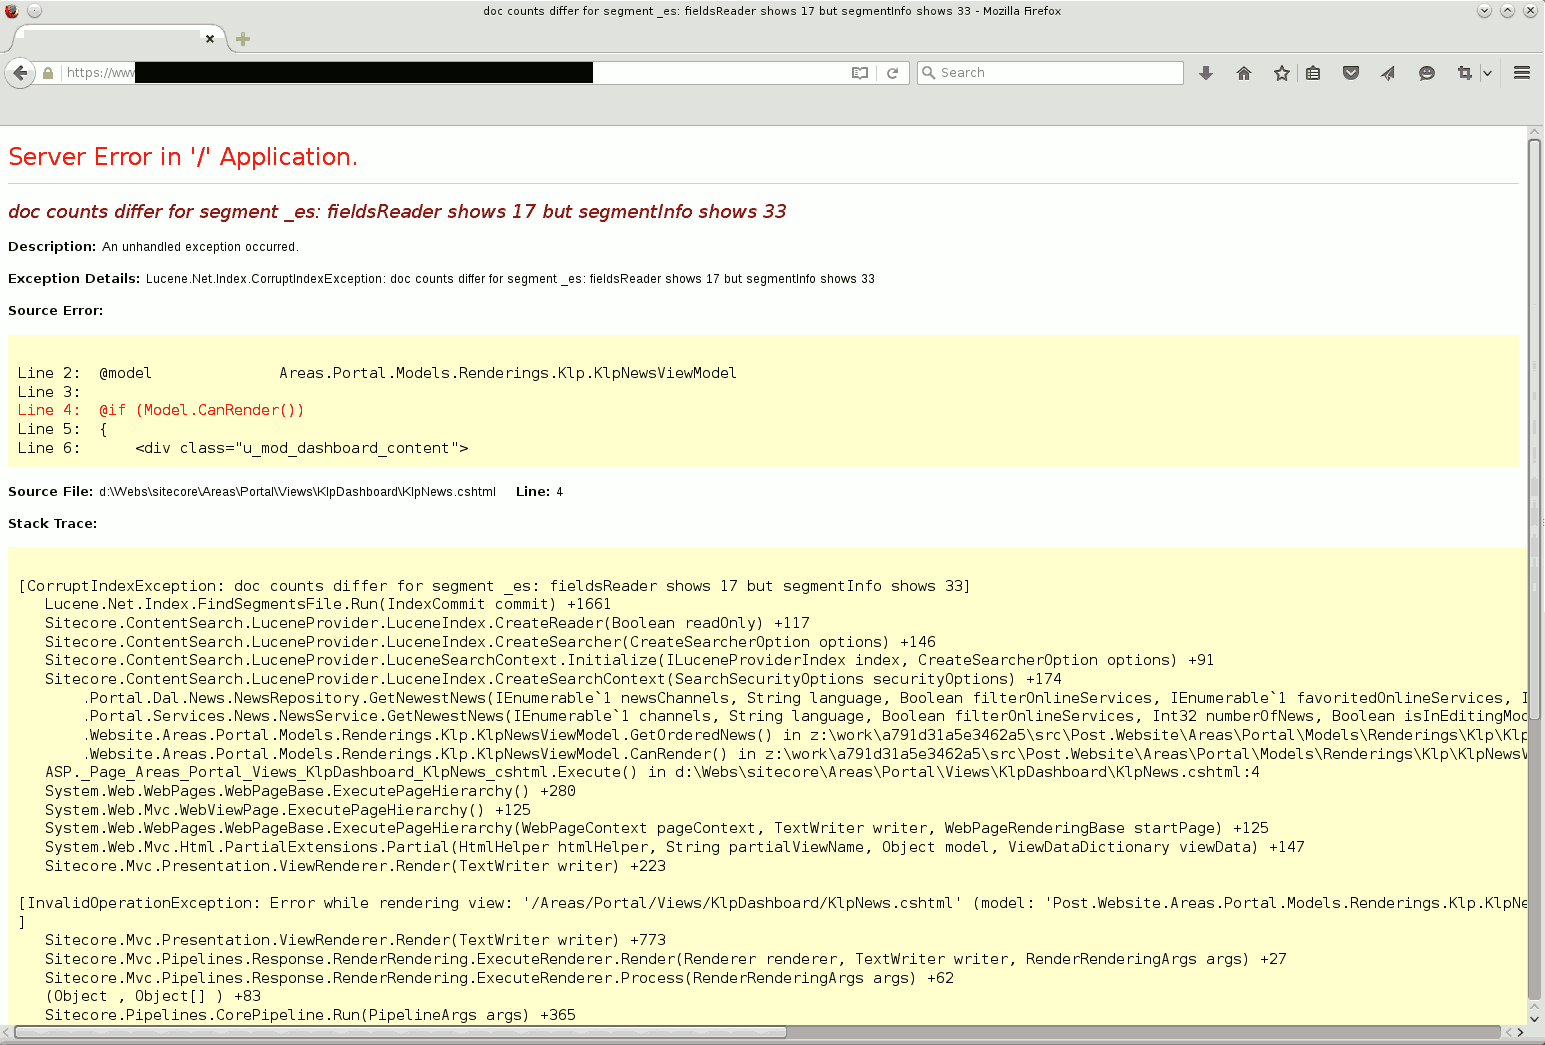 Stacktrace of exception shown to the user in the browser